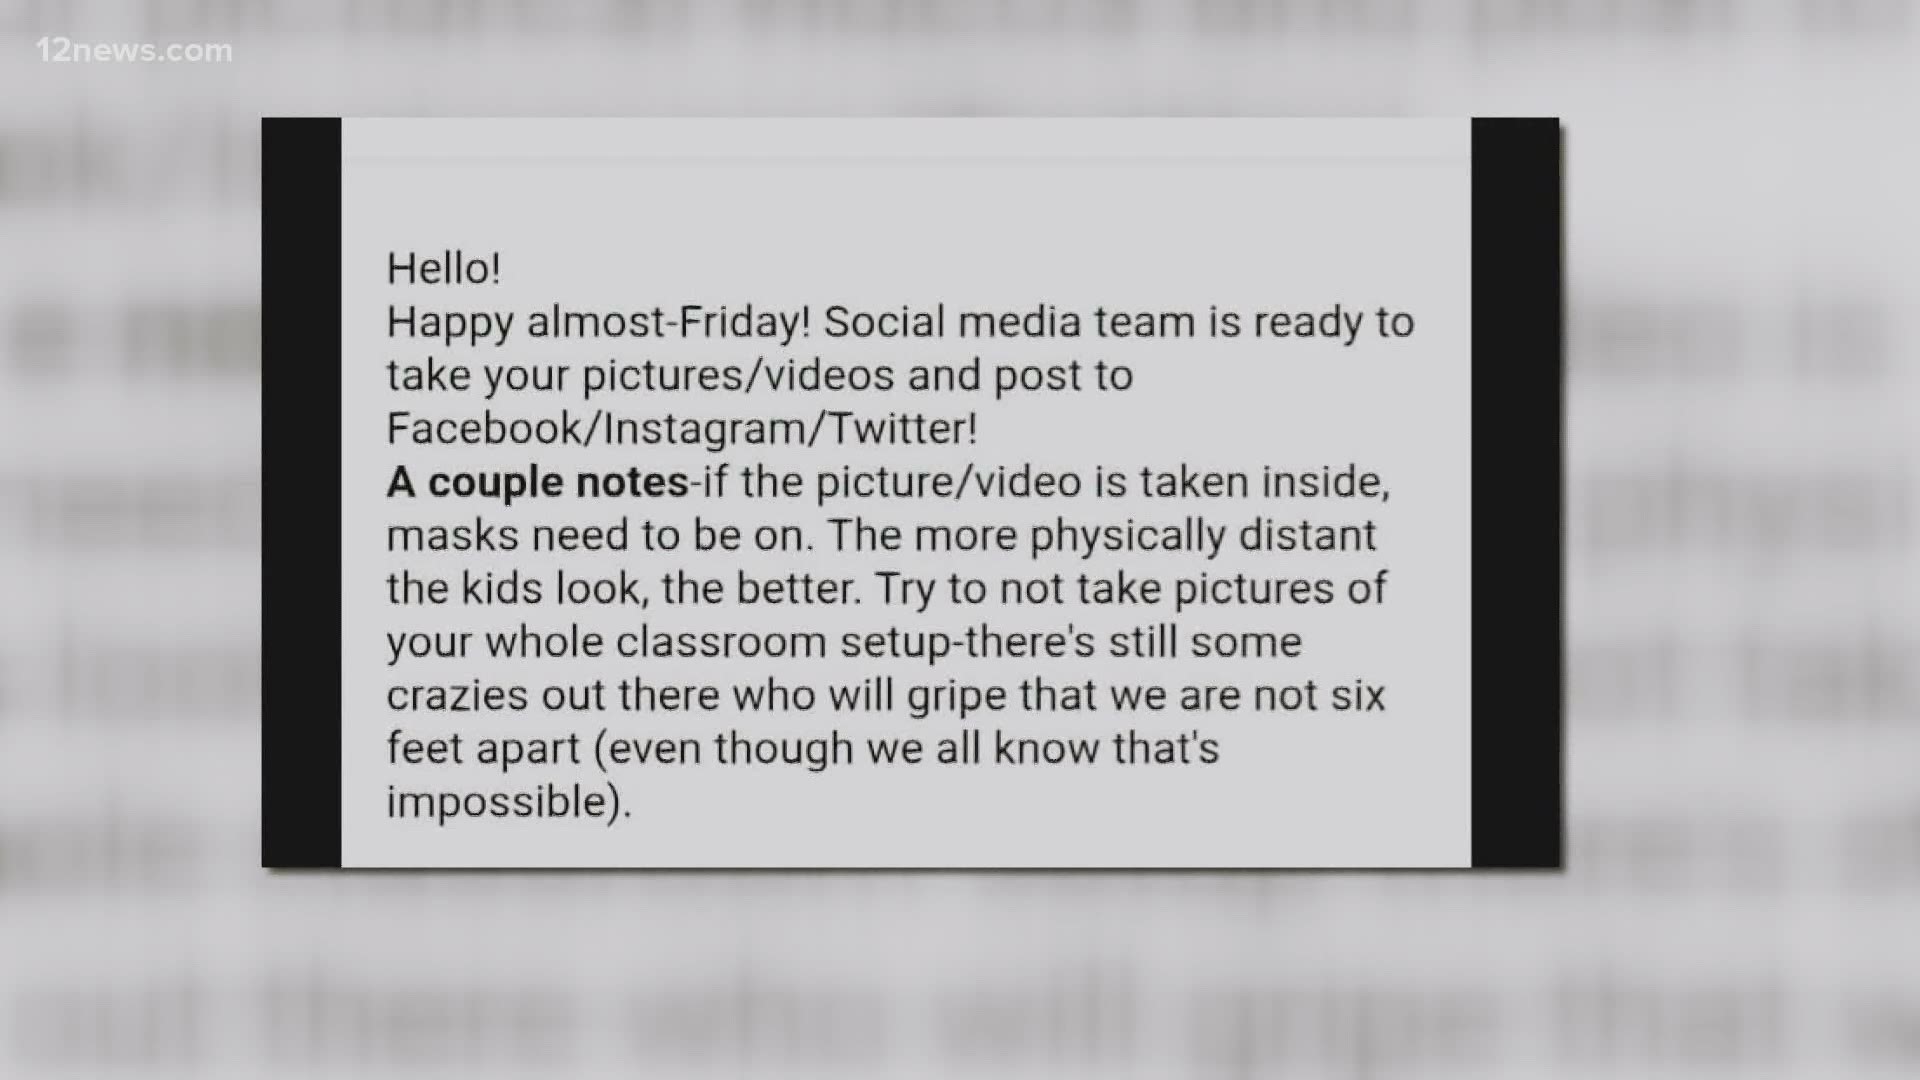 An internal email from a teacher at Desert Mountain Elementary school appears to detail how the school’s PR team is propping up social distancing efforts.